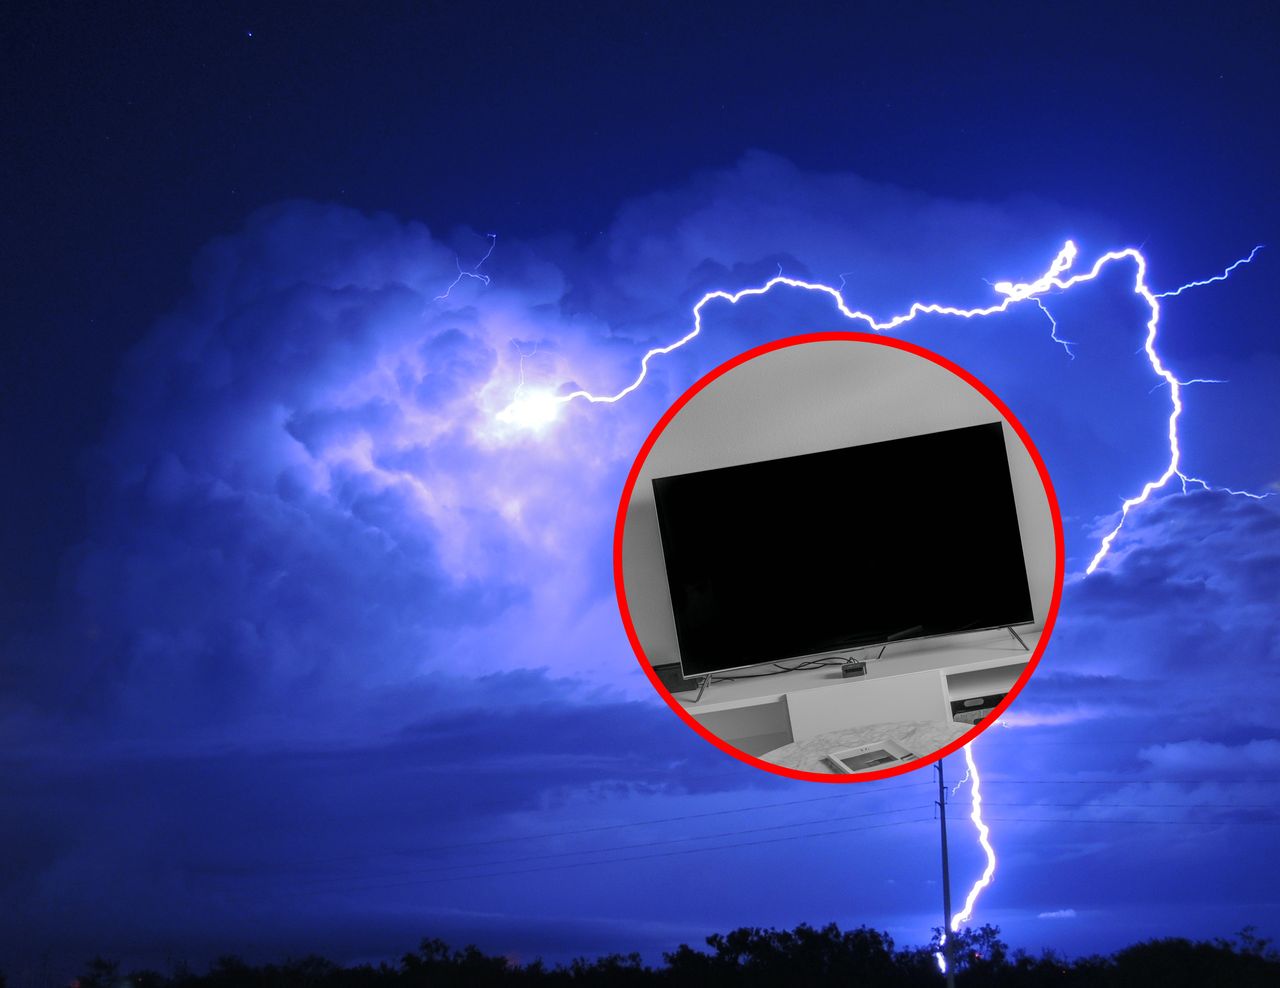 <Television during a storm. Disconnect from the power?>